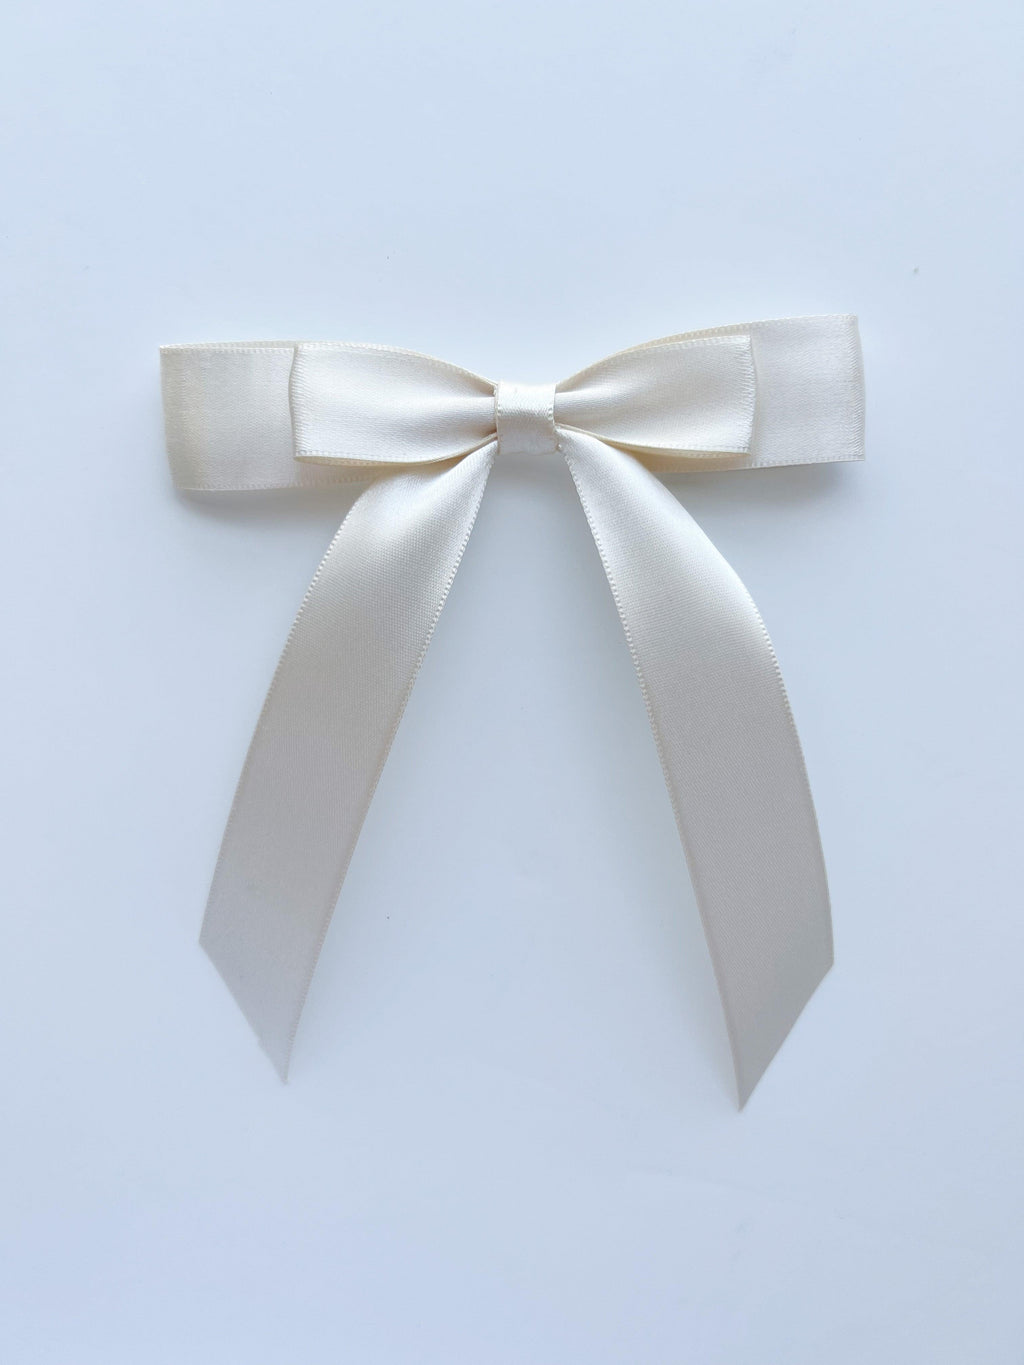 Heirloom Bow - Ivory | Nashville Bow Co. - Classic Hair Bows, Bow Ties, Basket Bows, Pacifier Clips, Wreath Sashes, Swaddle Bows. Classic Southern Charm.